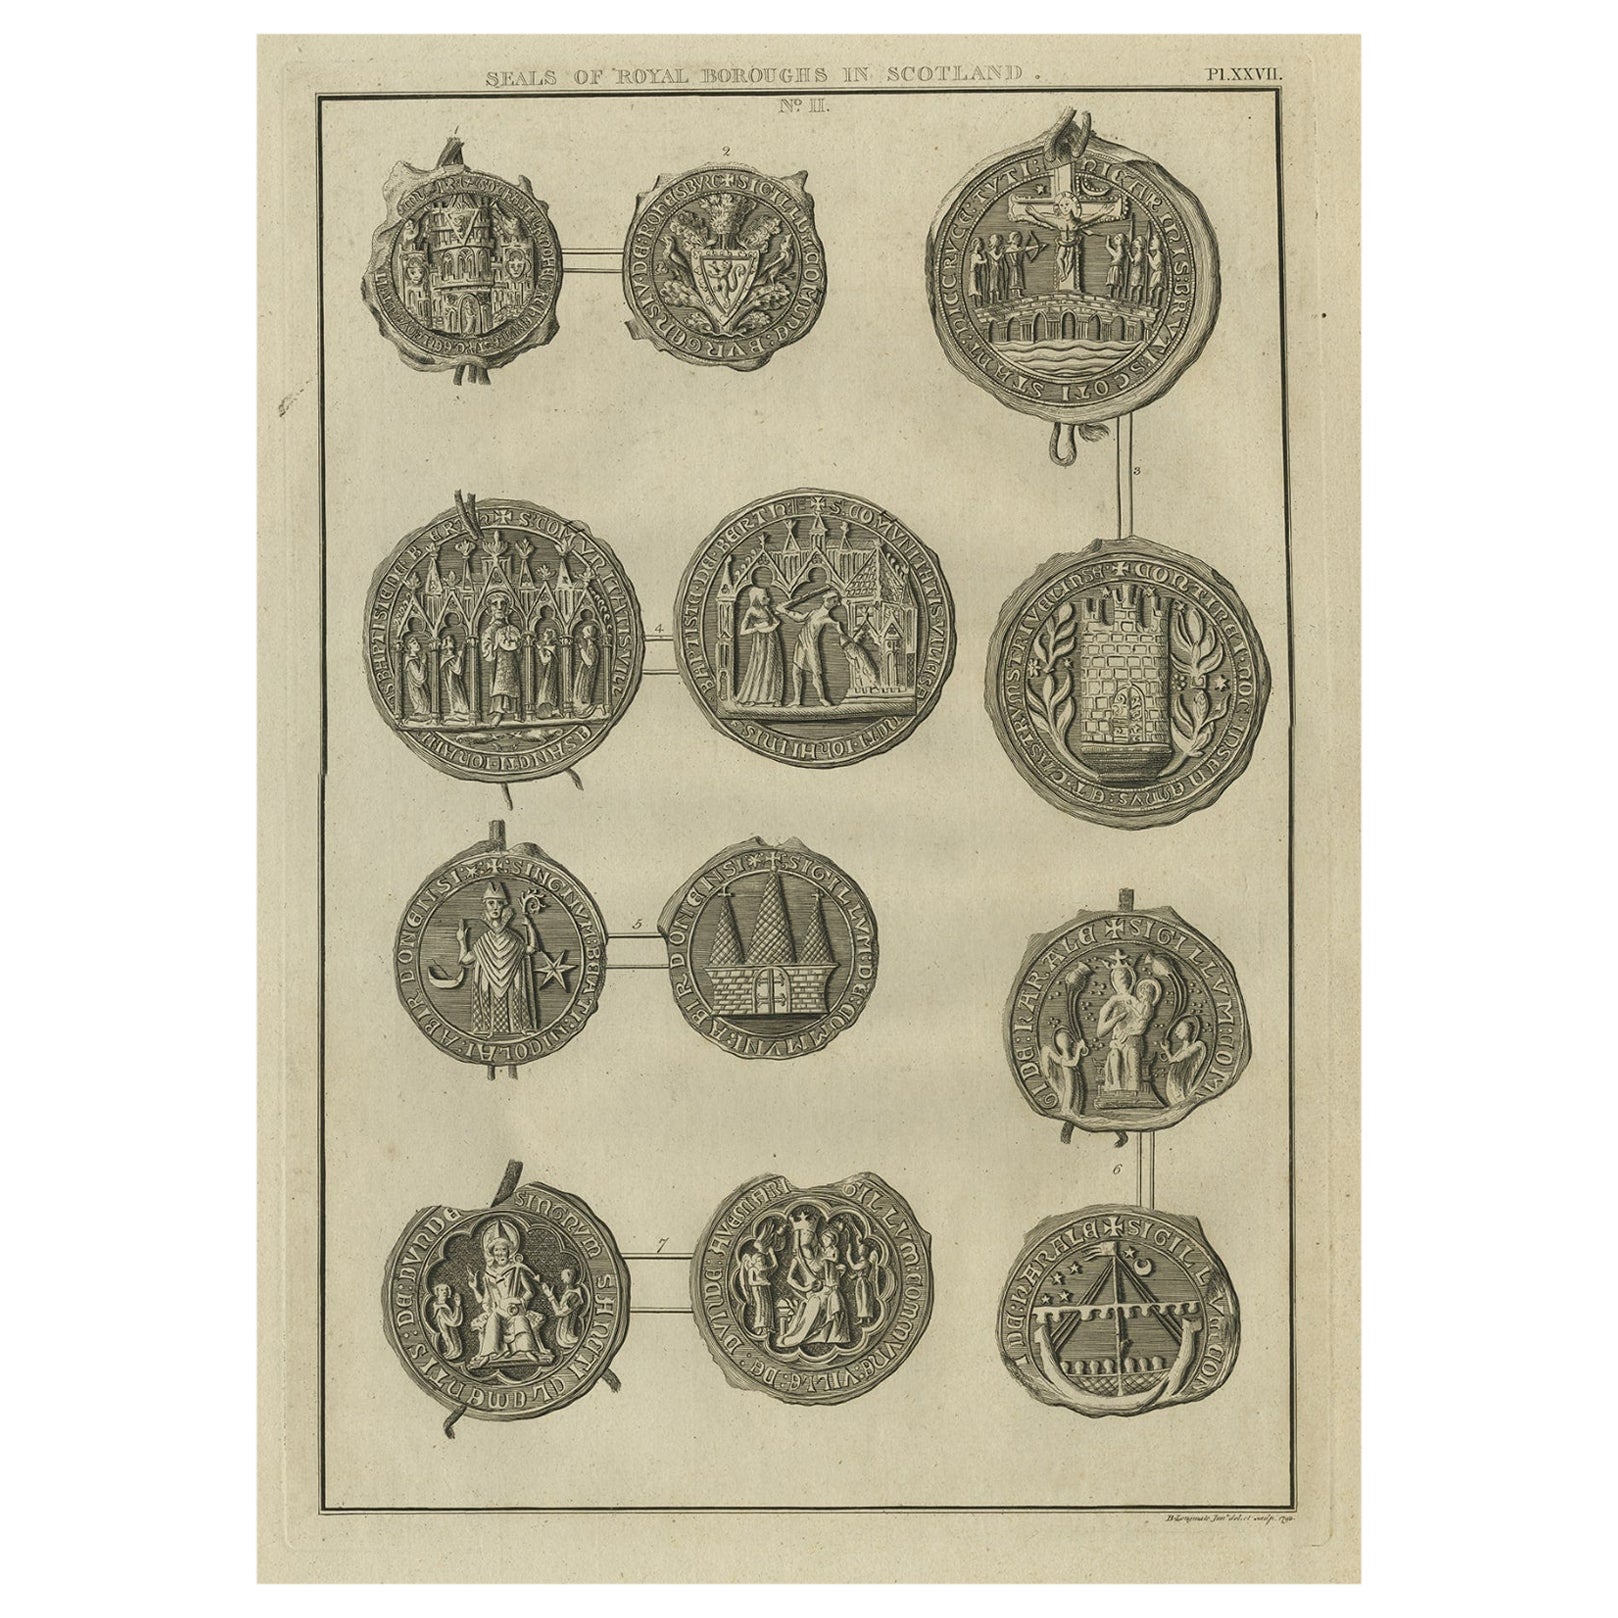 Rare Antique Print of Seals of Royal Boroughs in Scotland, 1792 For Sale